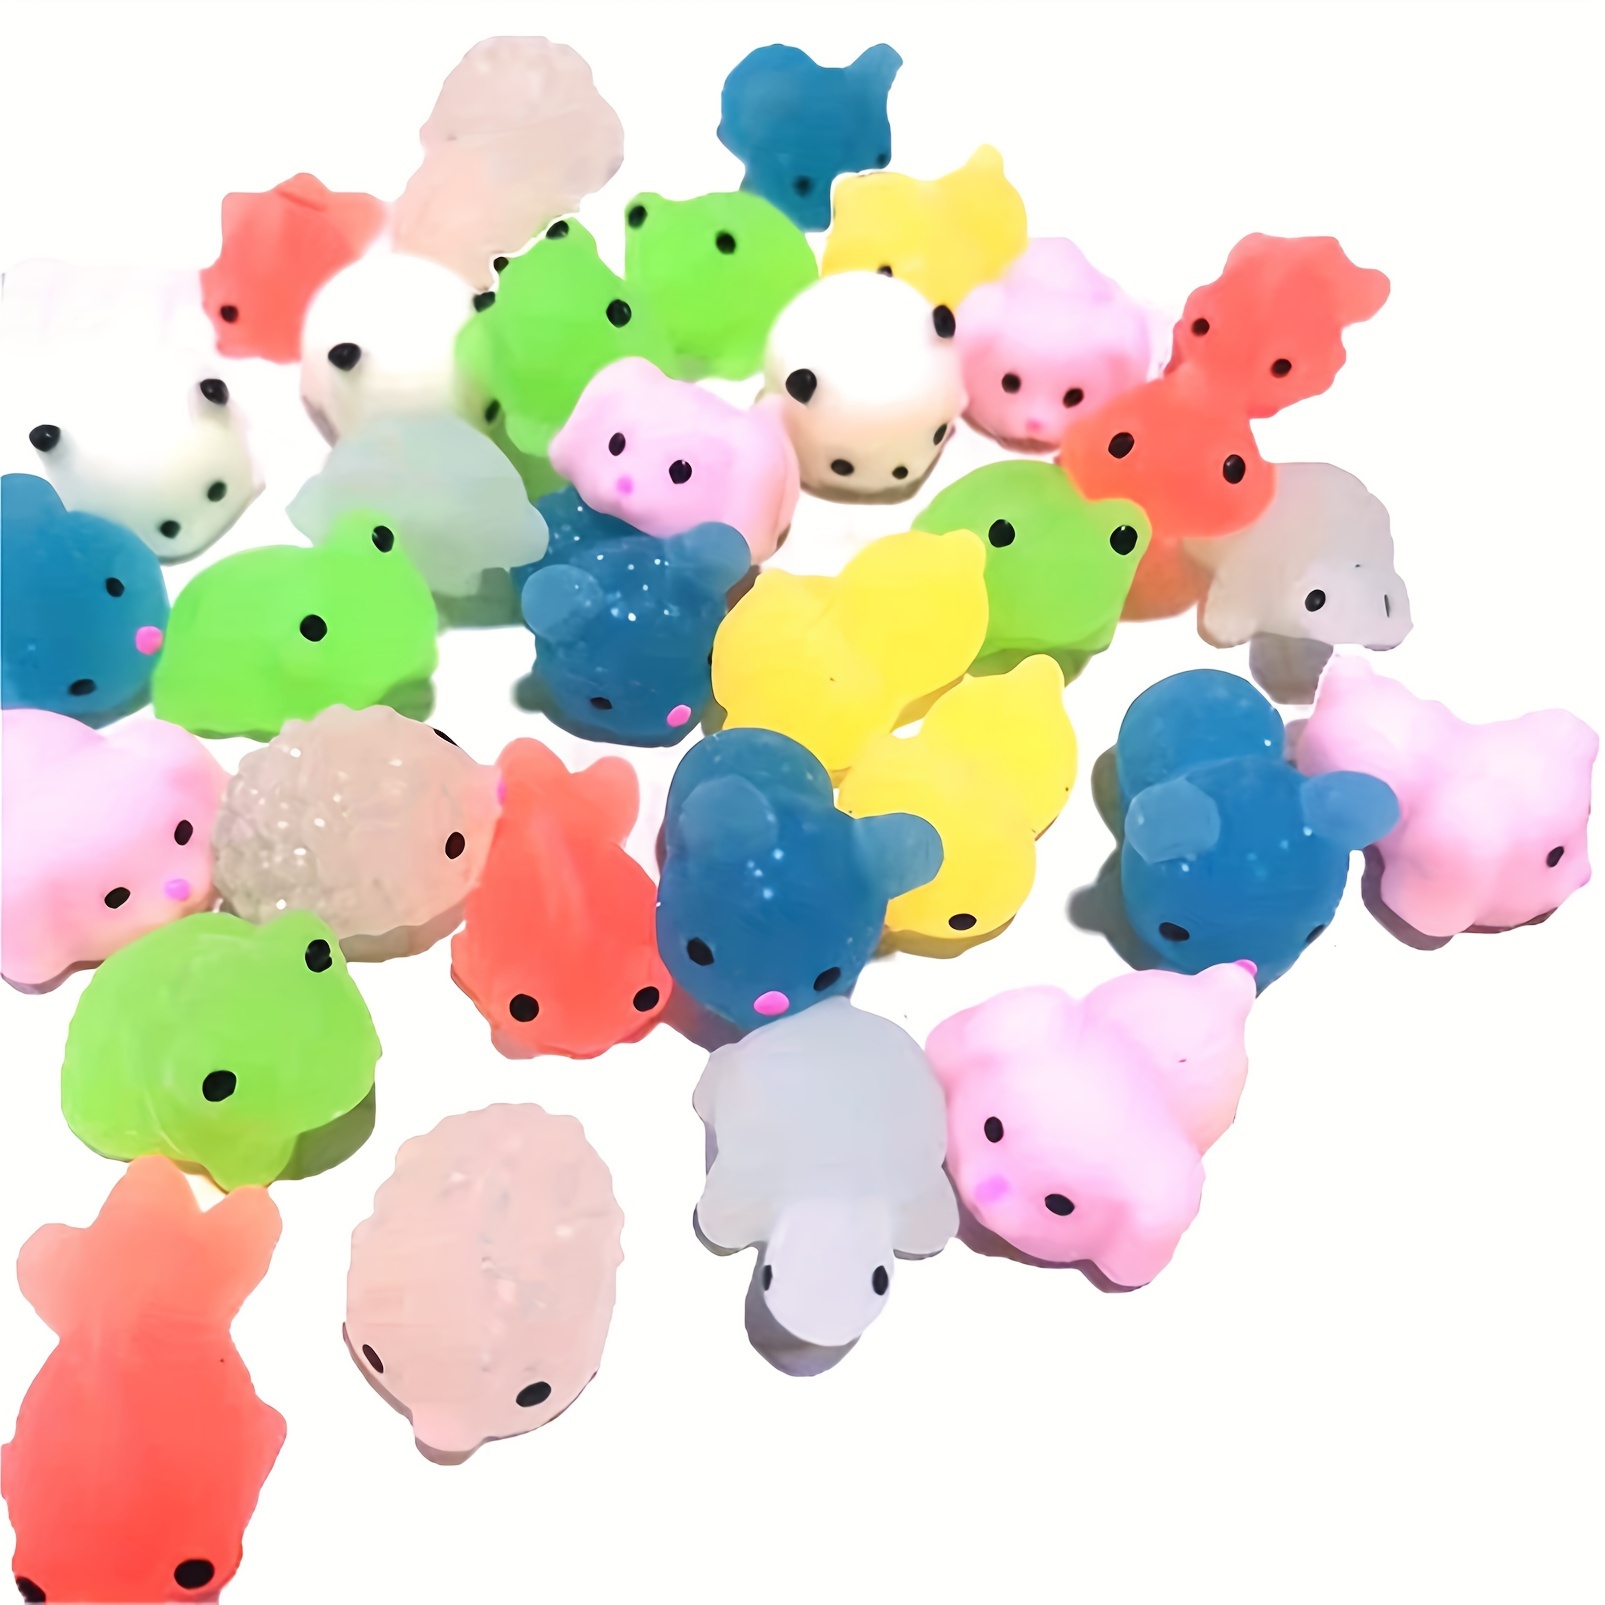 Mochi Squishy Toys, Mini Squishy Party Favors for kids Animal